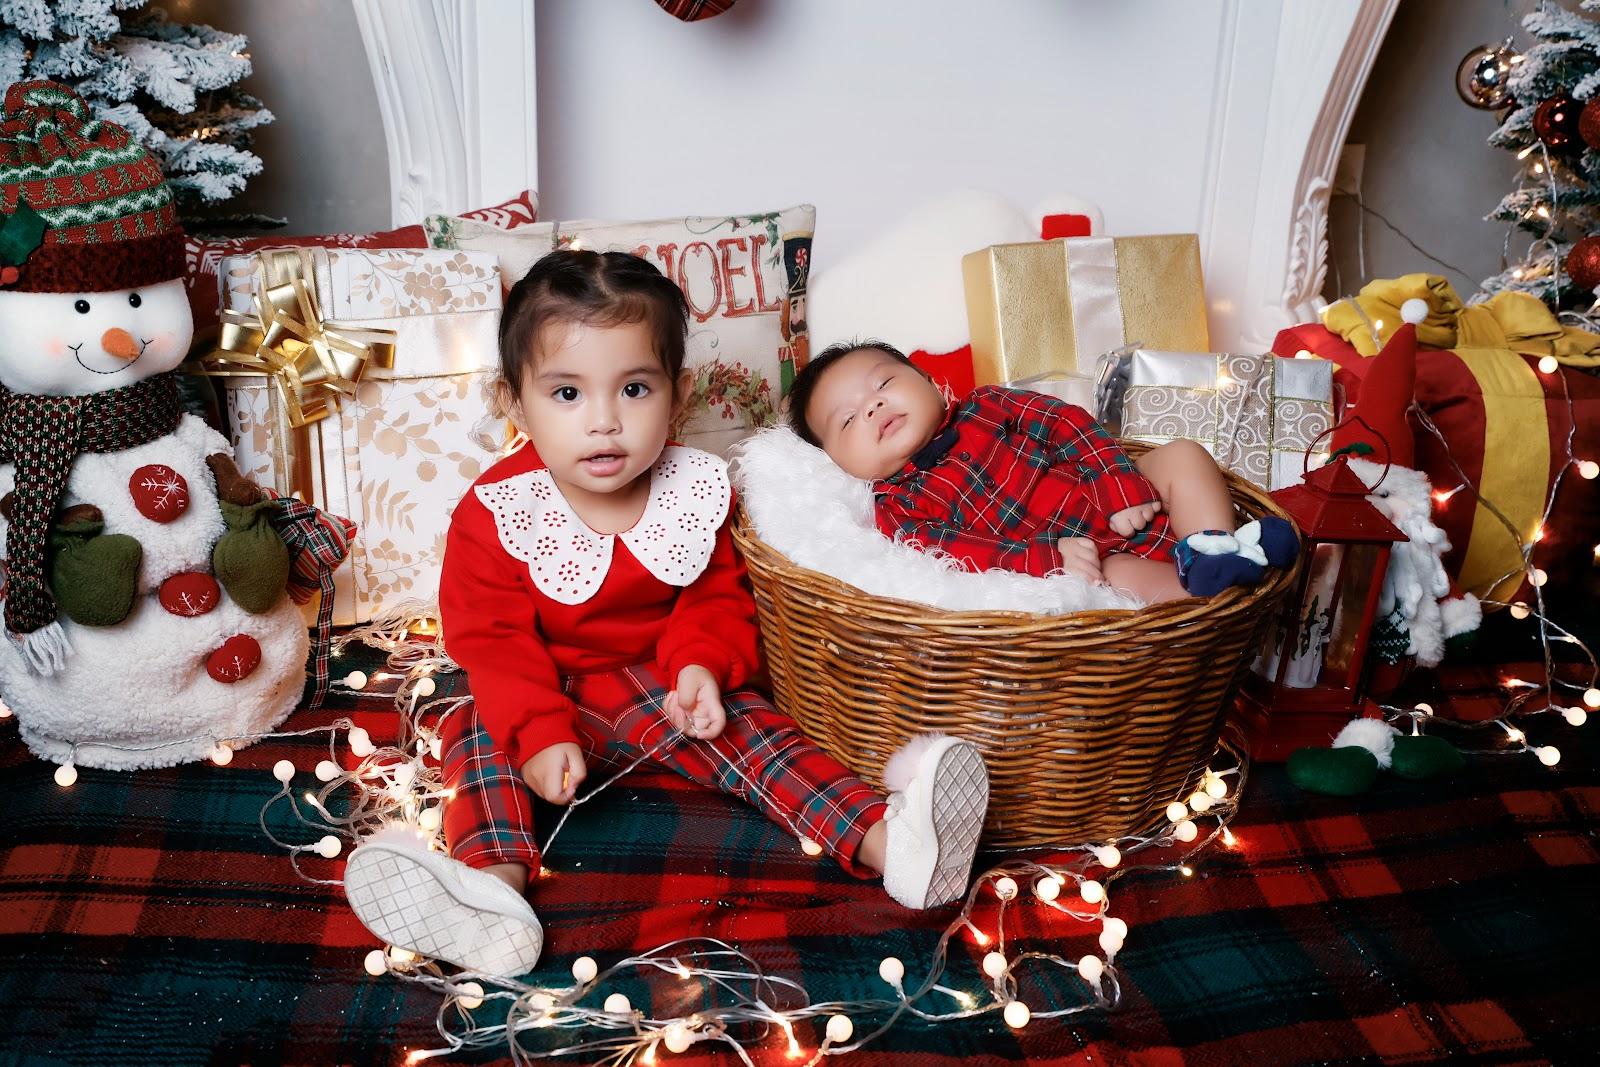 newborn christmas photo idea: newborn sleeping in a wicker or Christmas basket dressed up in Christmas-themed outfit